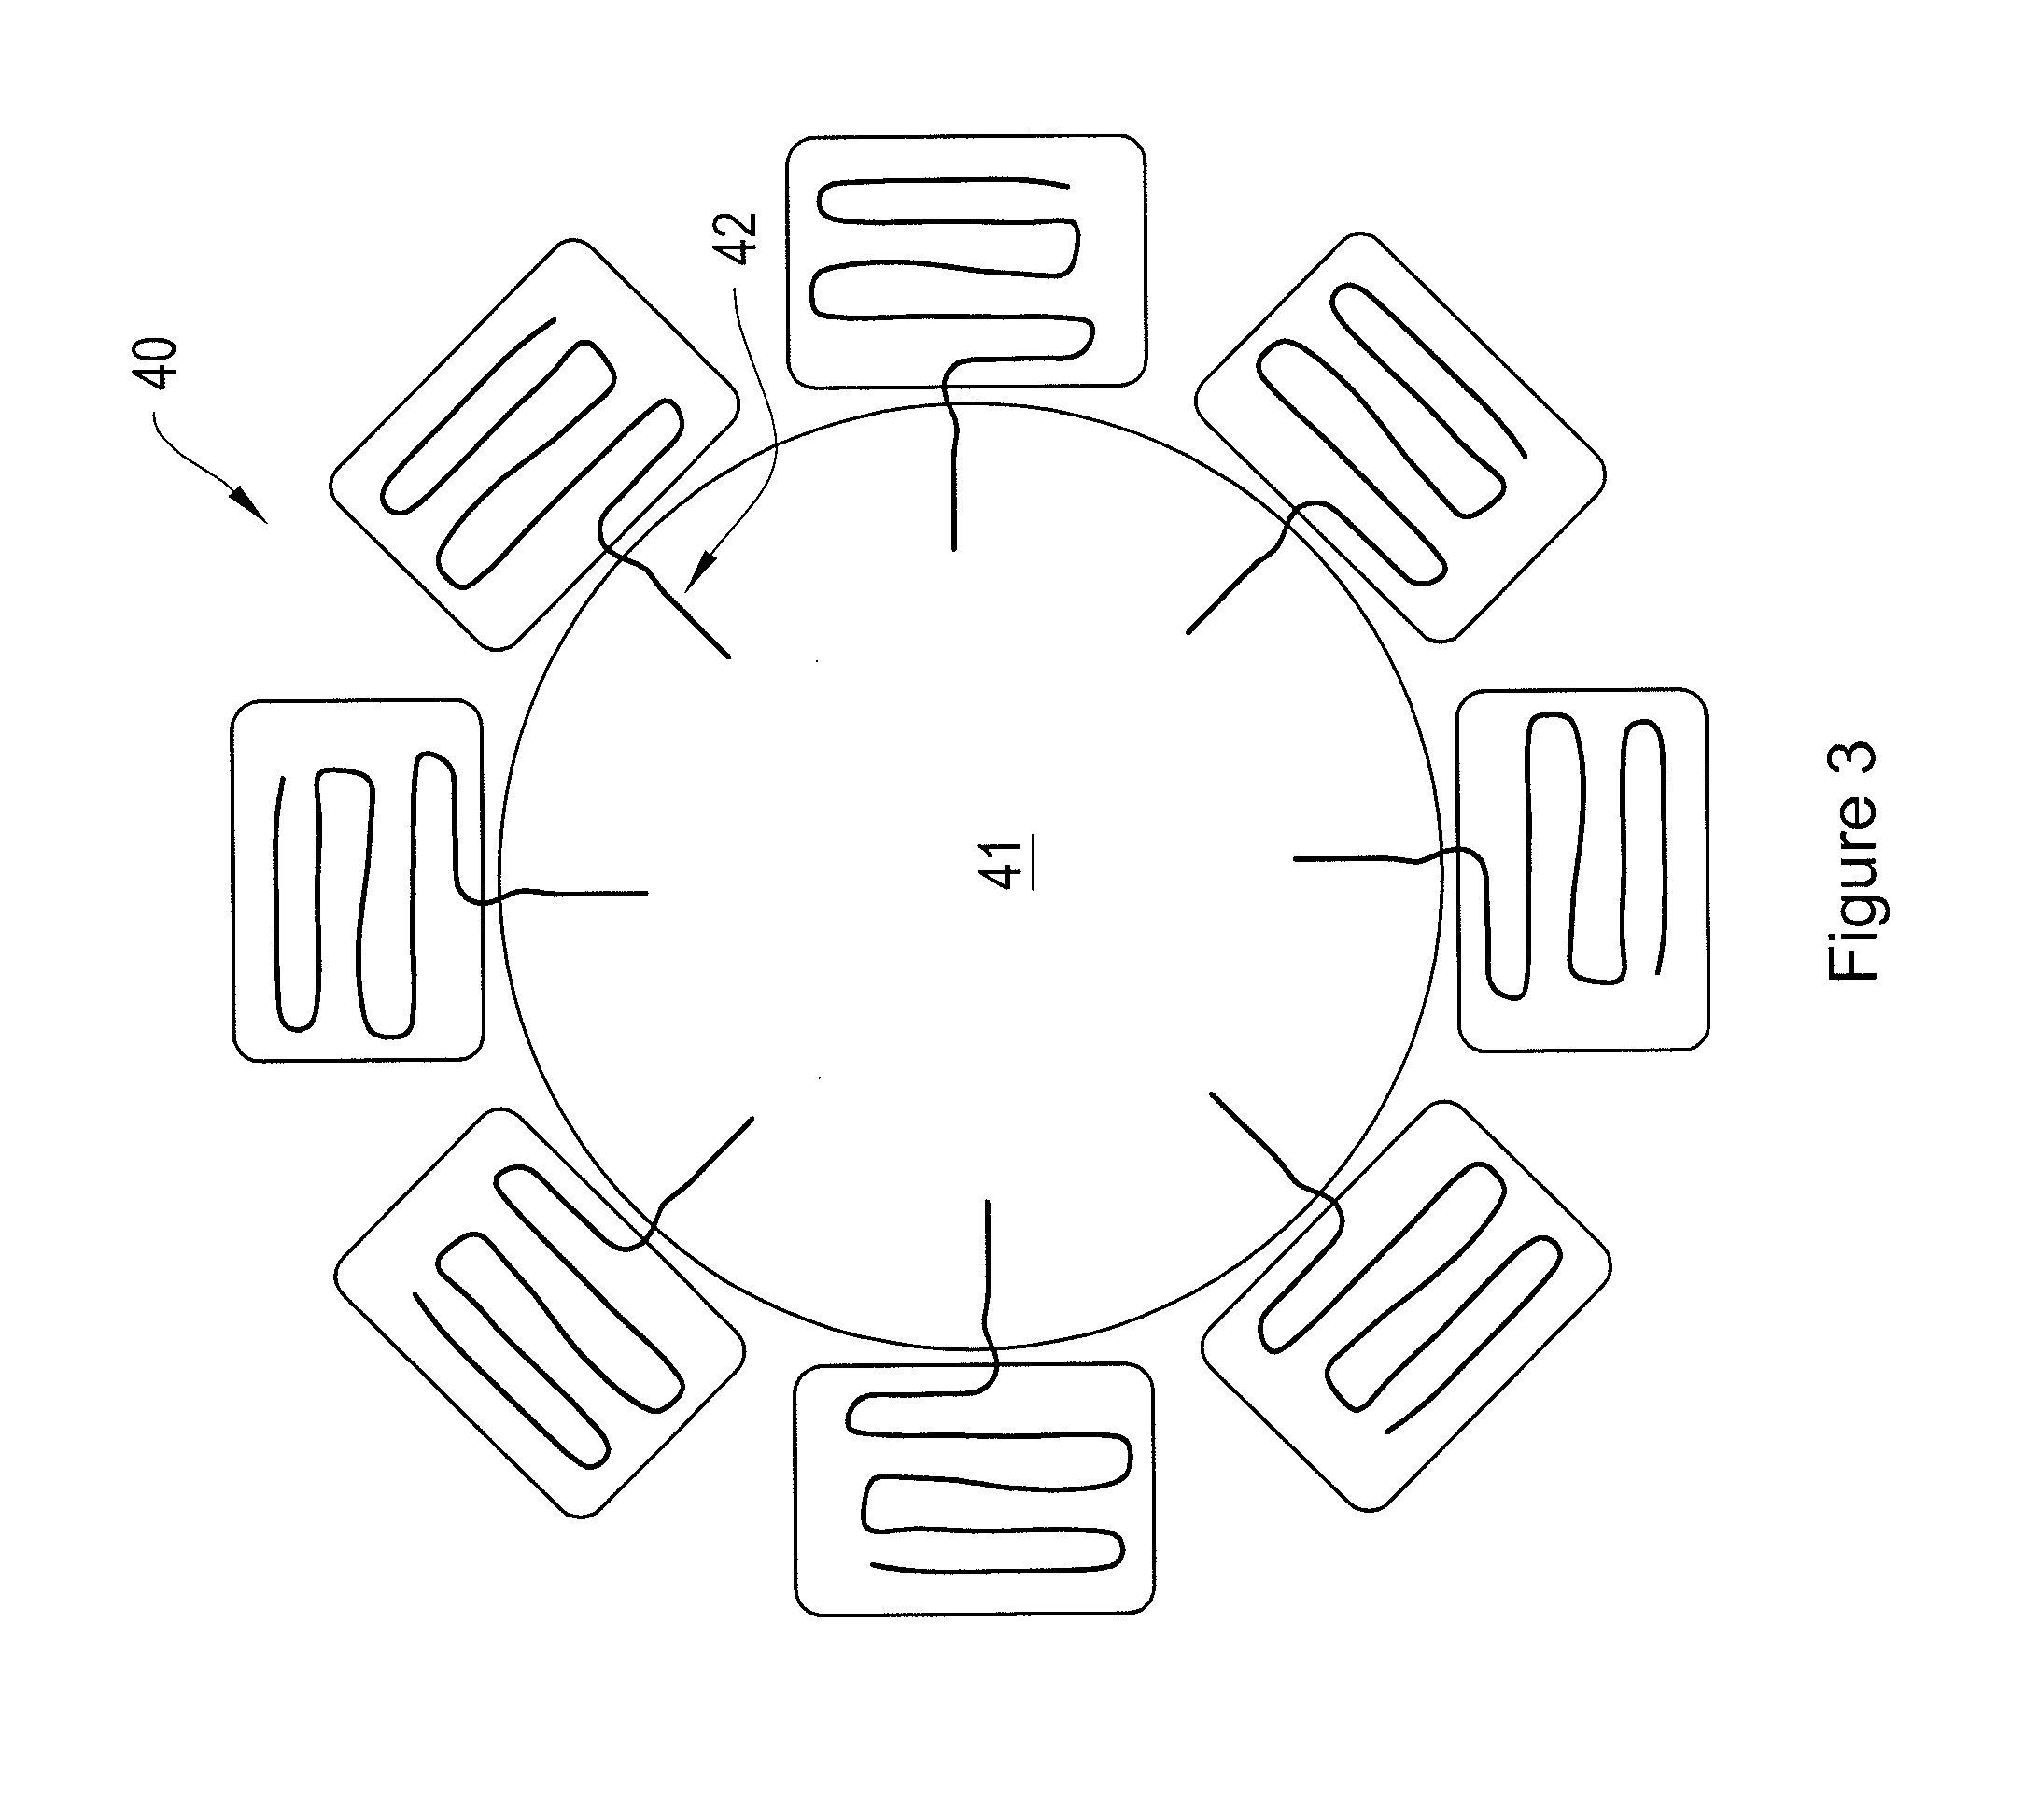 Intracellular nanosensors and methods for their introduction into cells